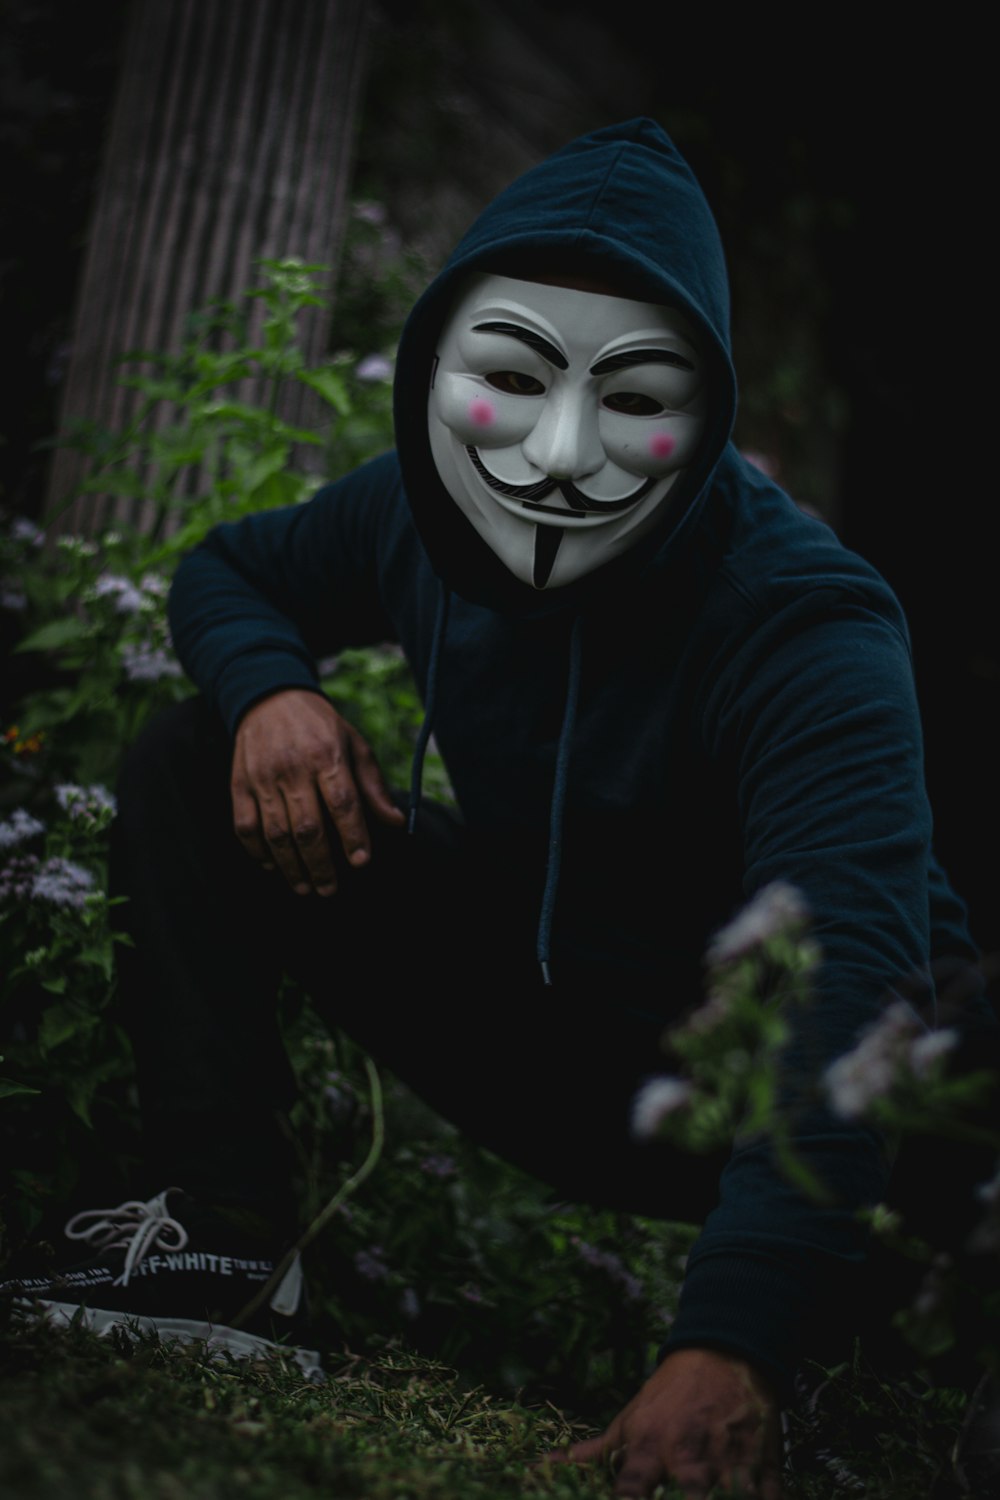 man sitting and wearing Guy Fawkes mask